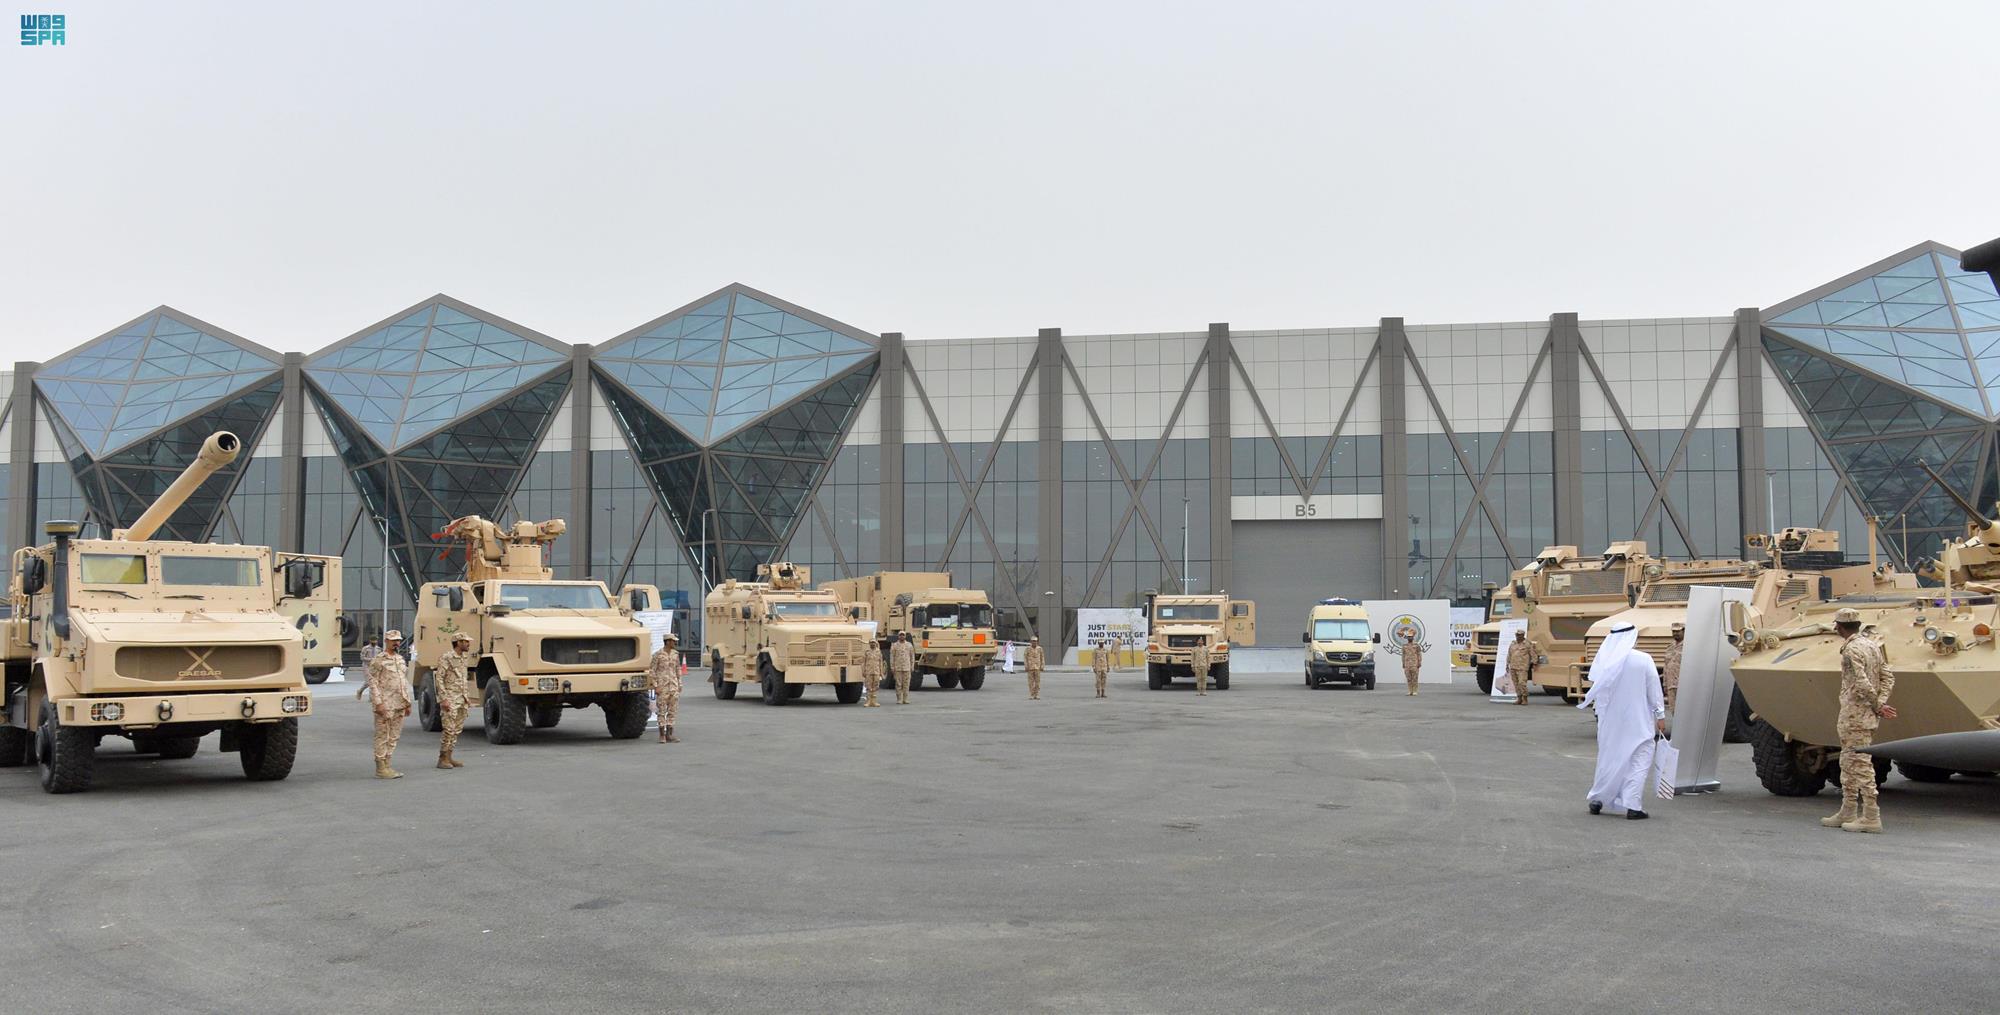 Military vehicles on display in Riyadh for the World Defense Show.